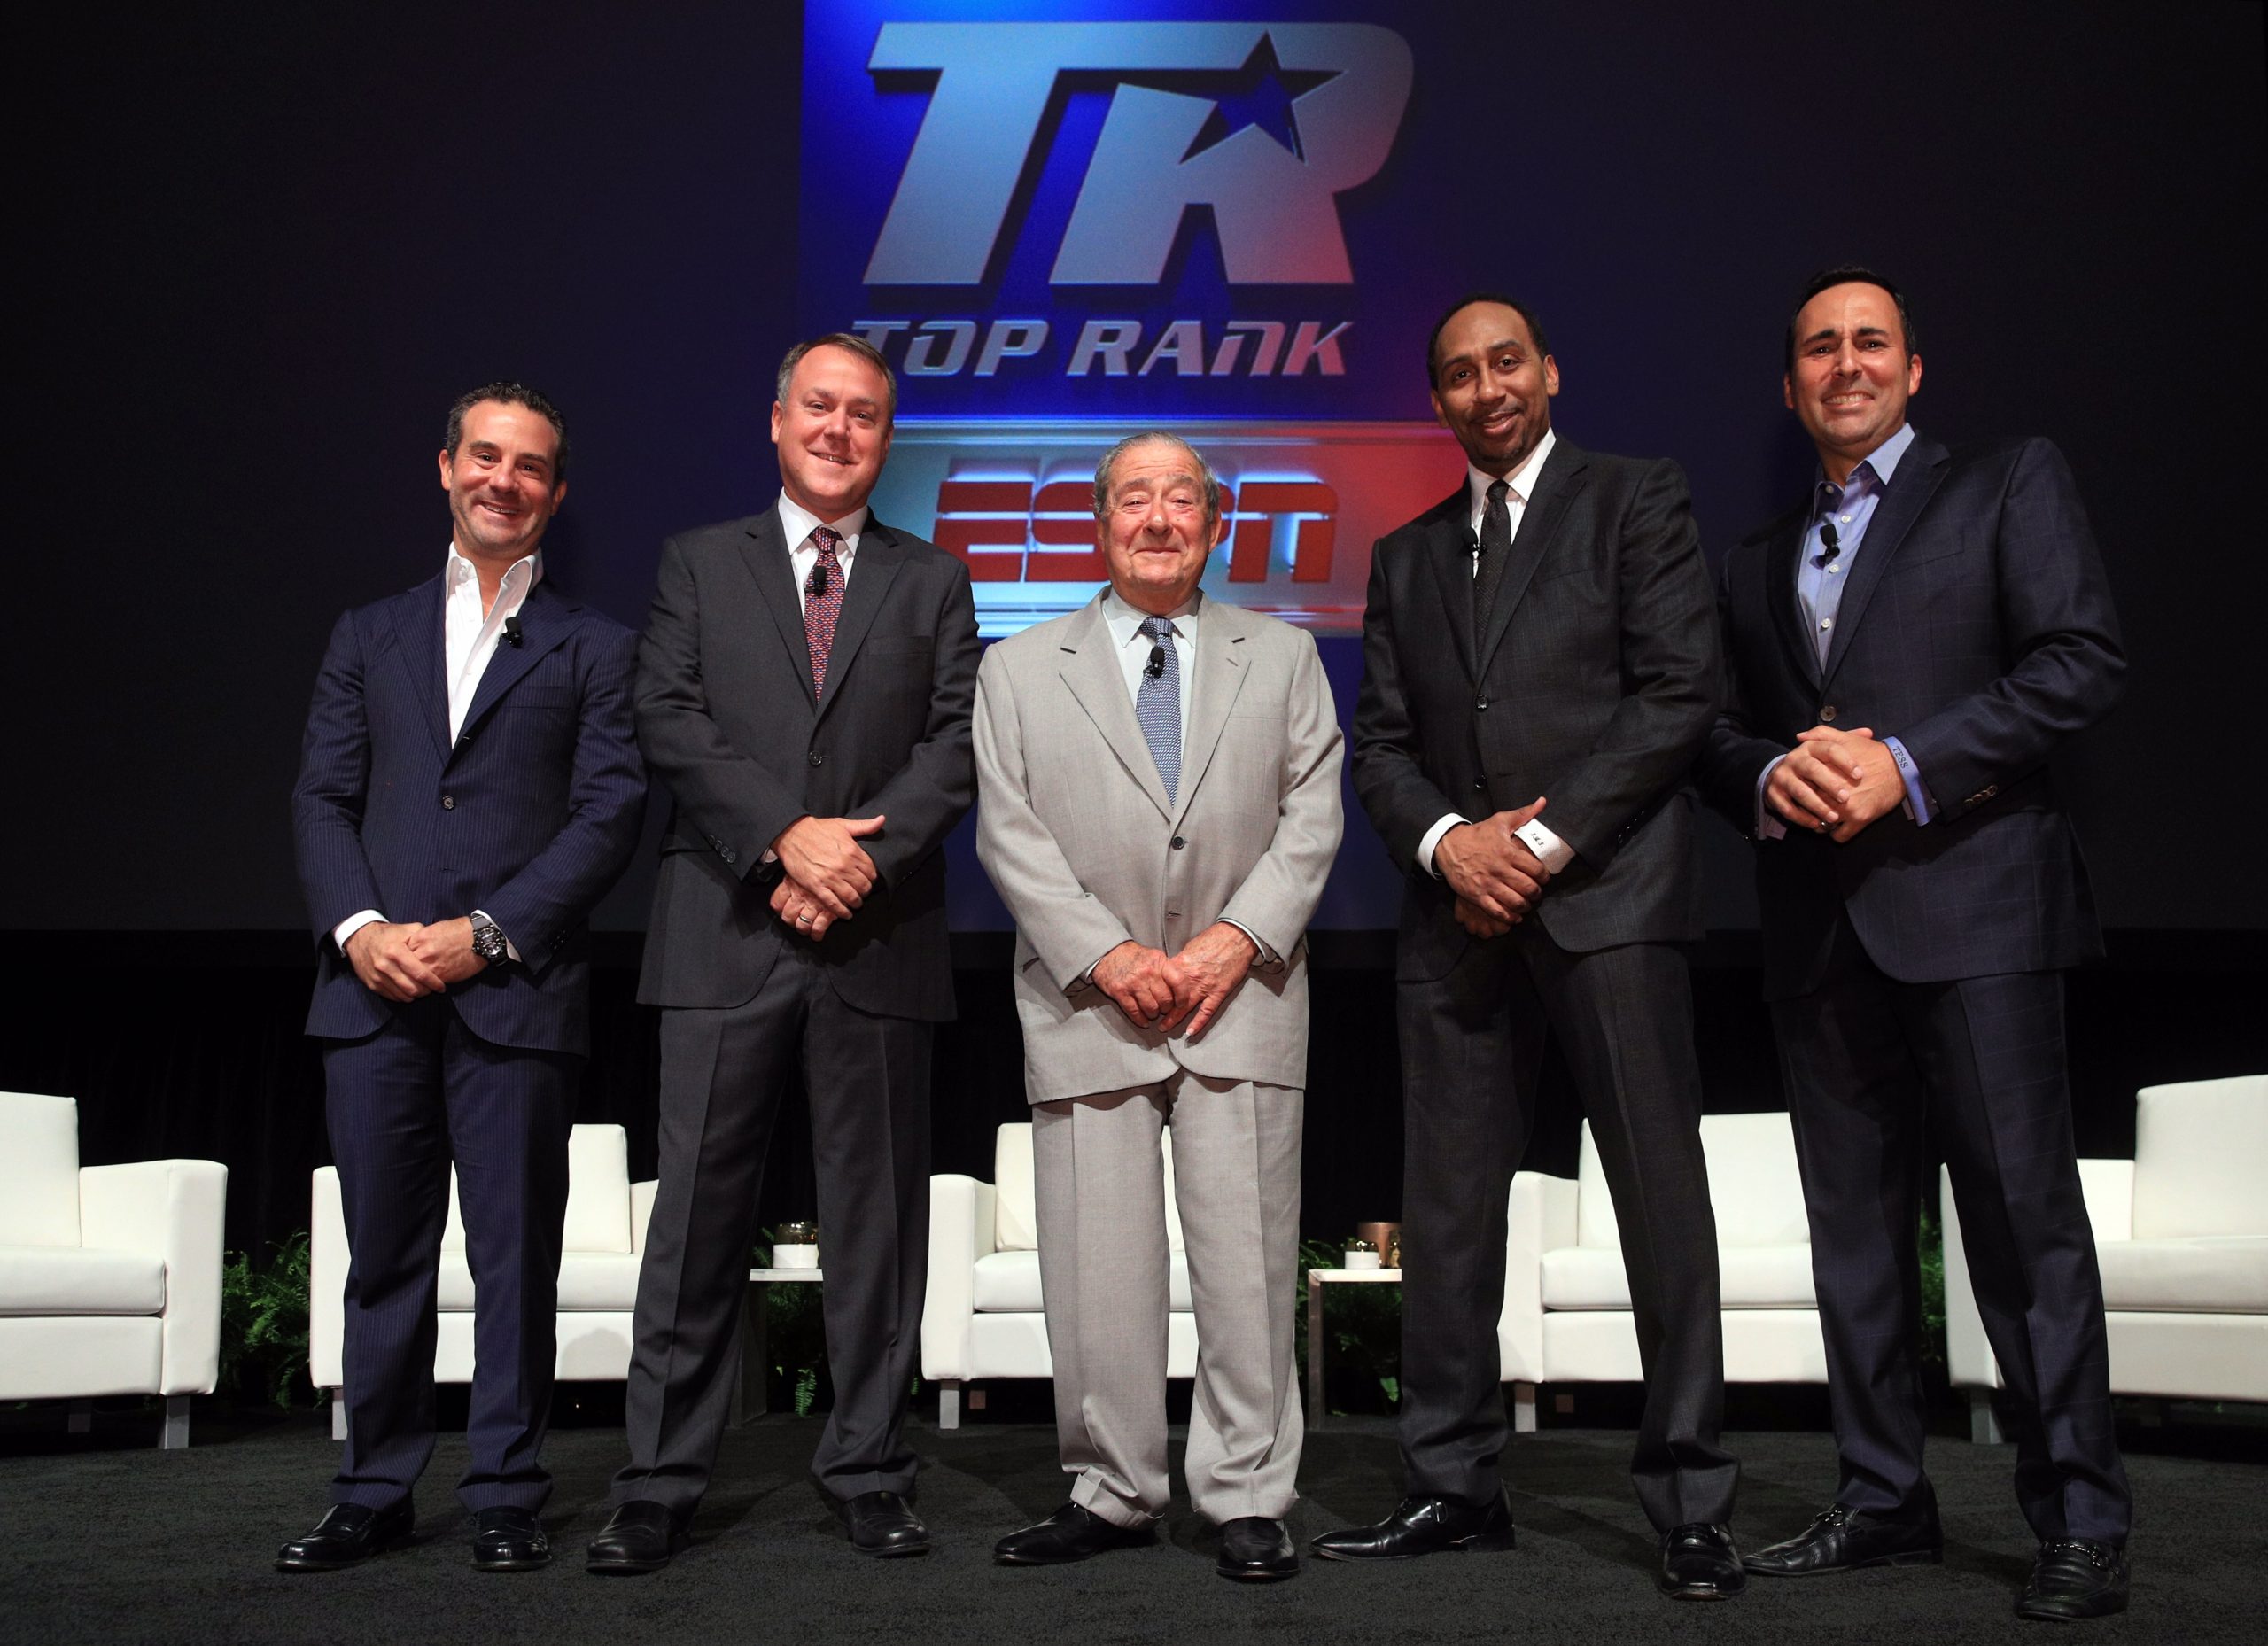 ESPN and Top Rank Announce Mega Comprehensive Multi-year Agreement for New Fight Series